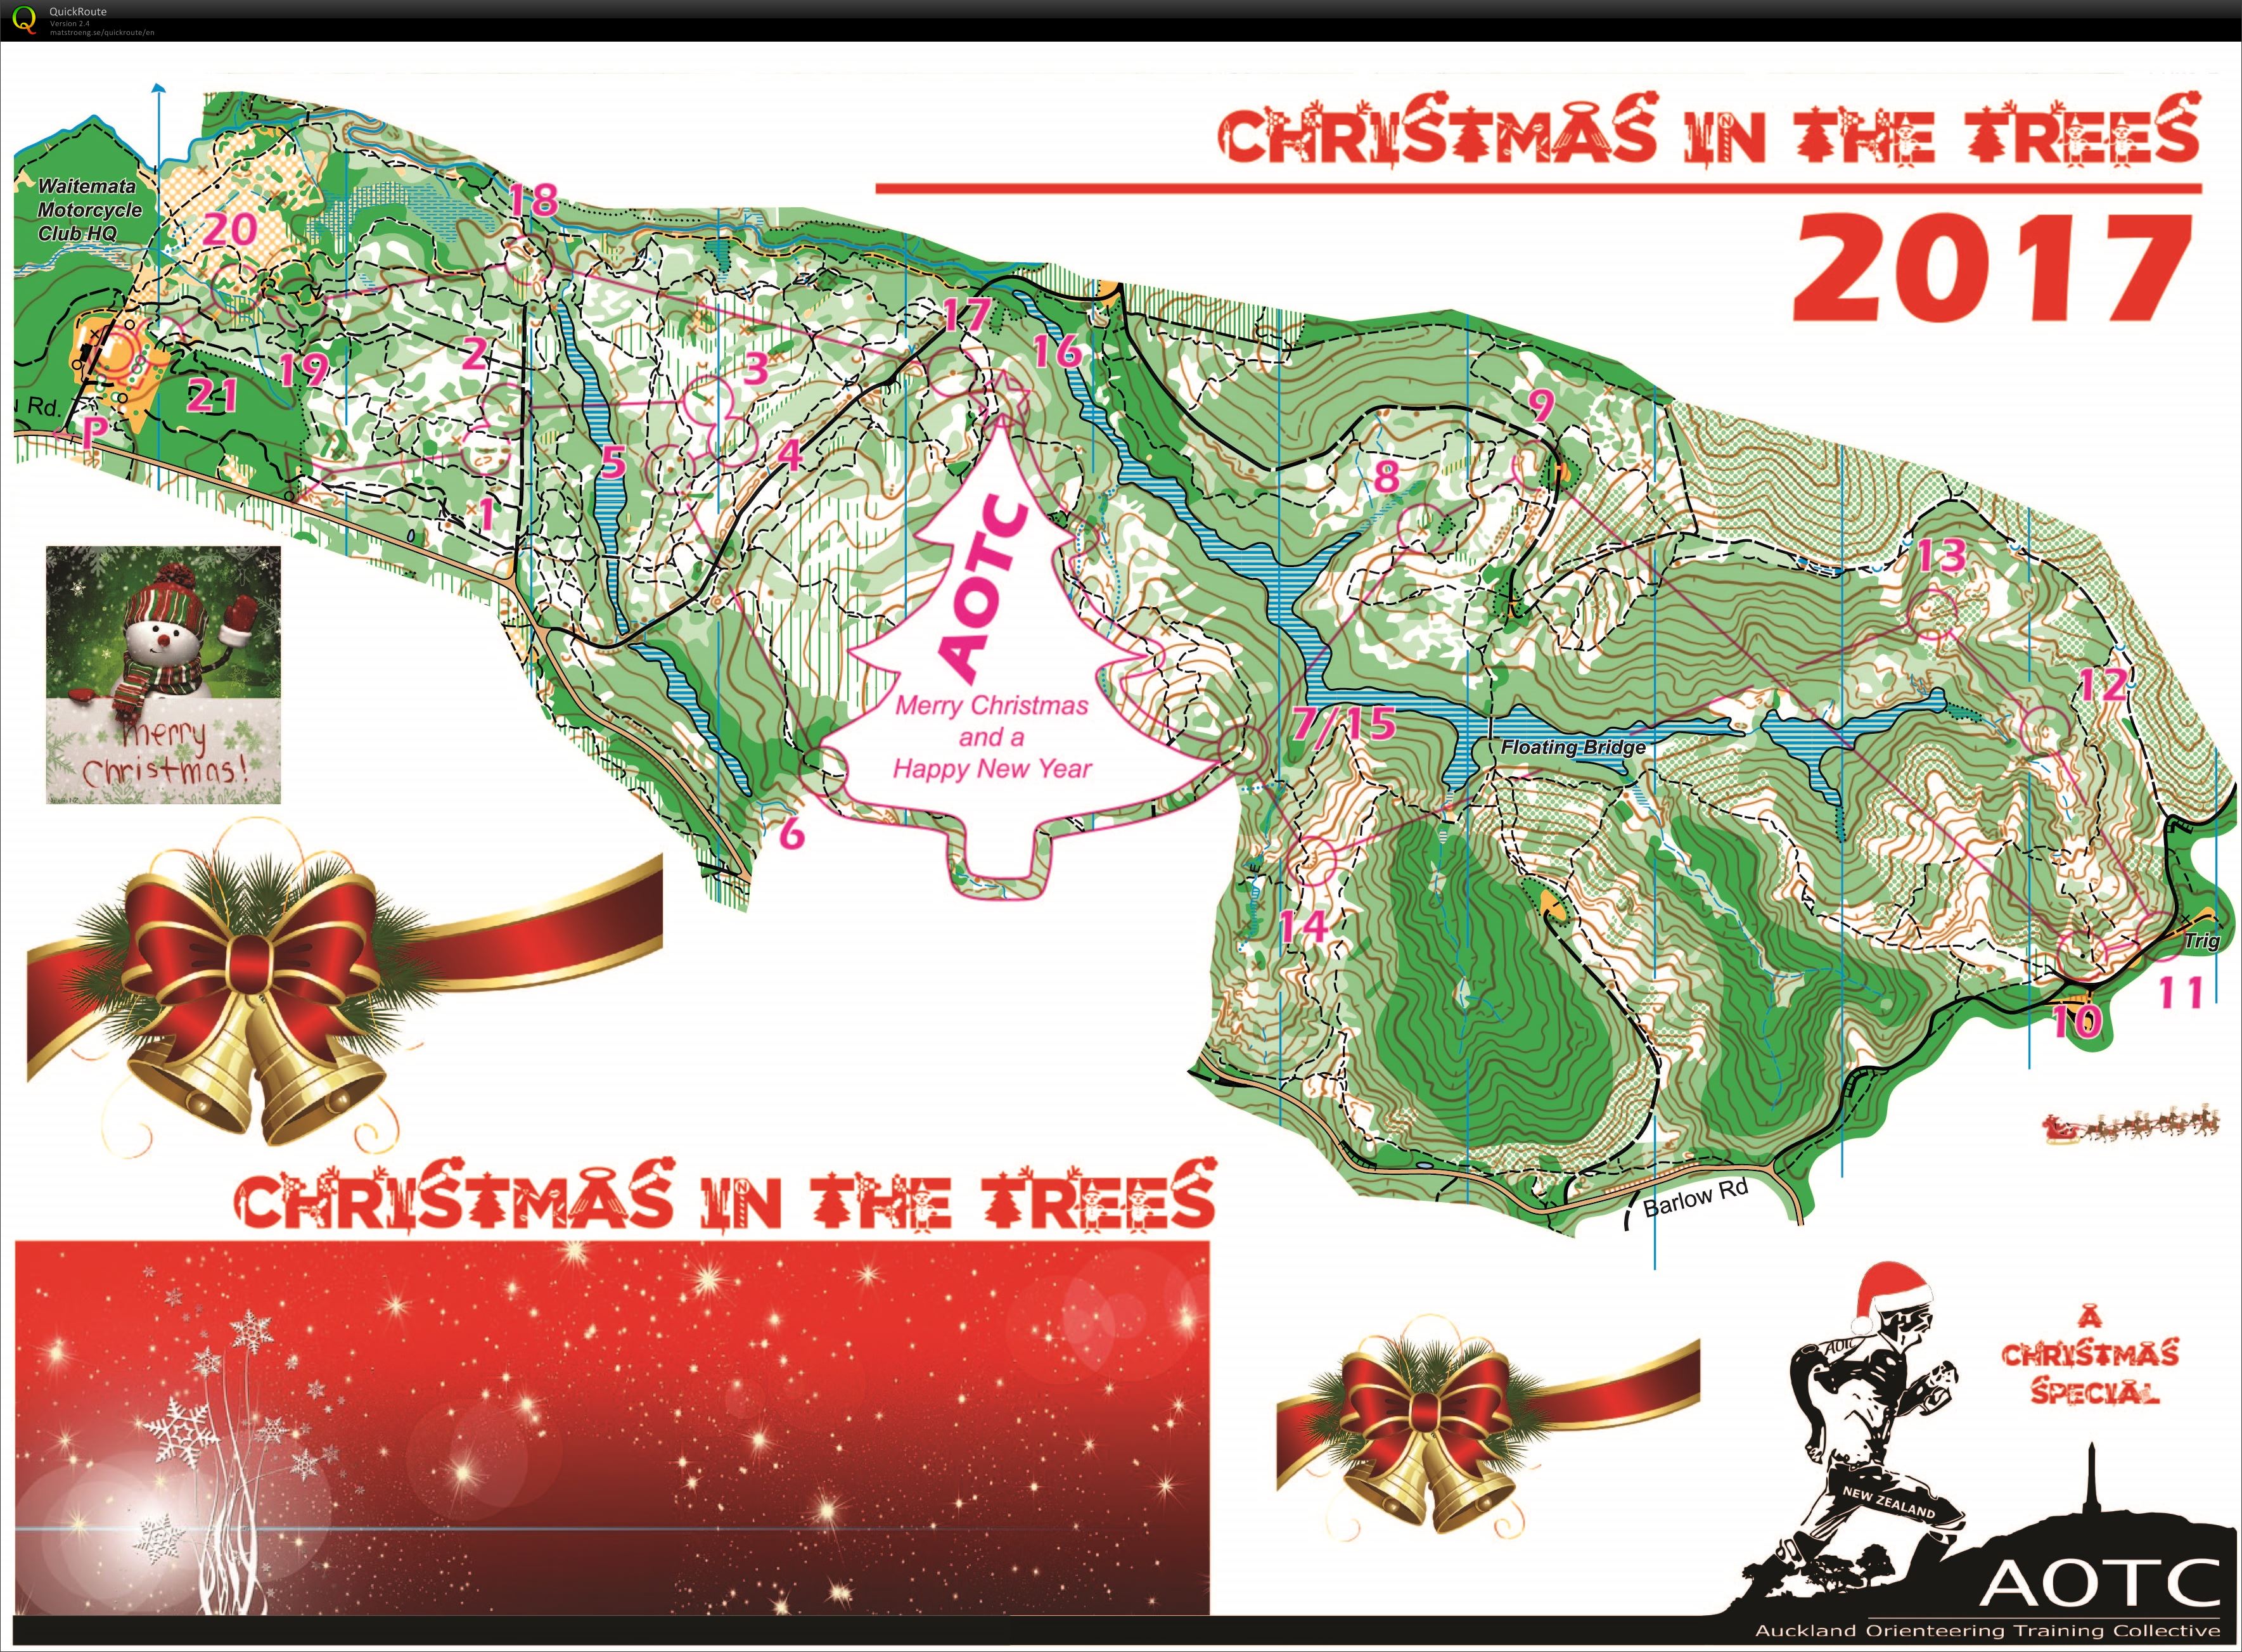 Christmas in the Trees 2017 (16-12-2017)